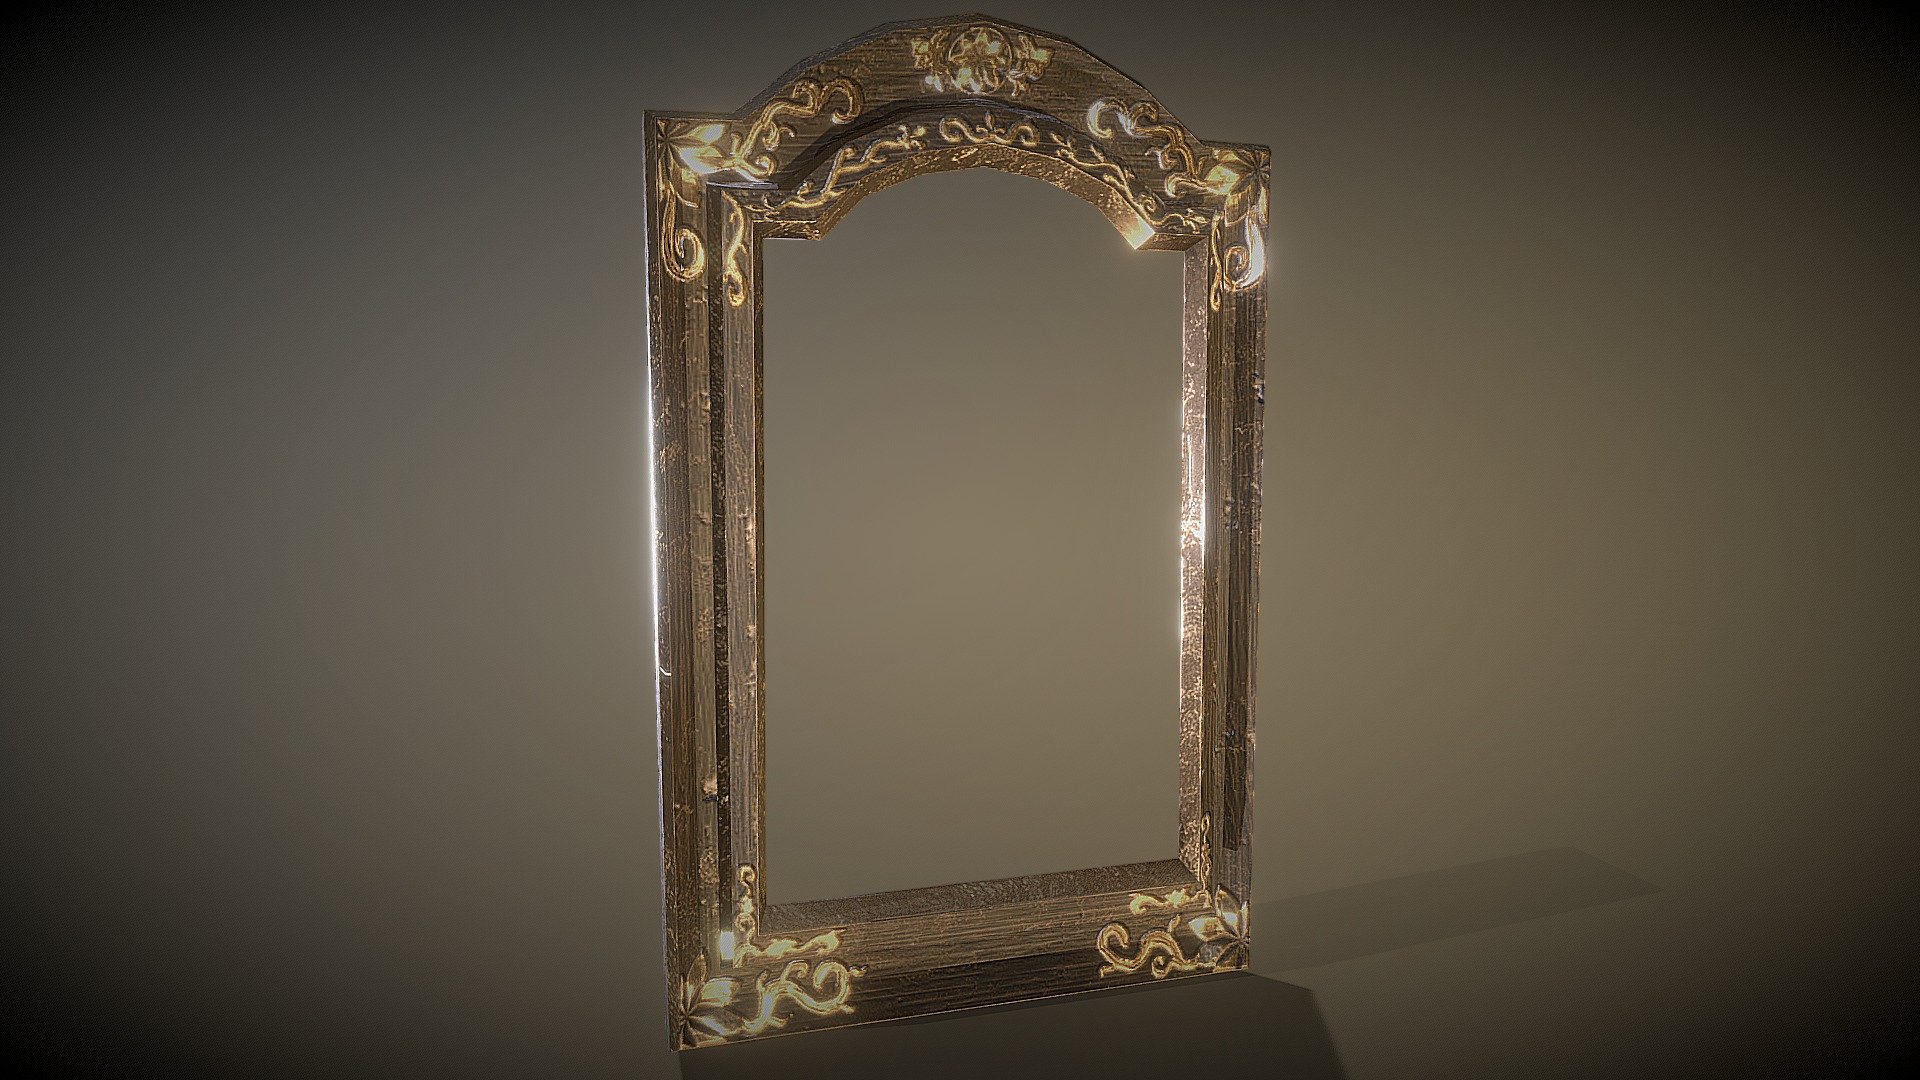 This ornate mirror was modelled and textured for EDEN the indie surreal horror game by Missing Mountain Dev. The game takes place in an Australian Manor post WWII and the Gold Rush. Drawing heavy influence from Victorian Era furnishings which were used to display wealth during this period.

Our game was featured at PAX Aus and you can keep updated on our progress on EDEN and other projects through our Twitter @MMountainDev and my personal account @contamienate 3d model